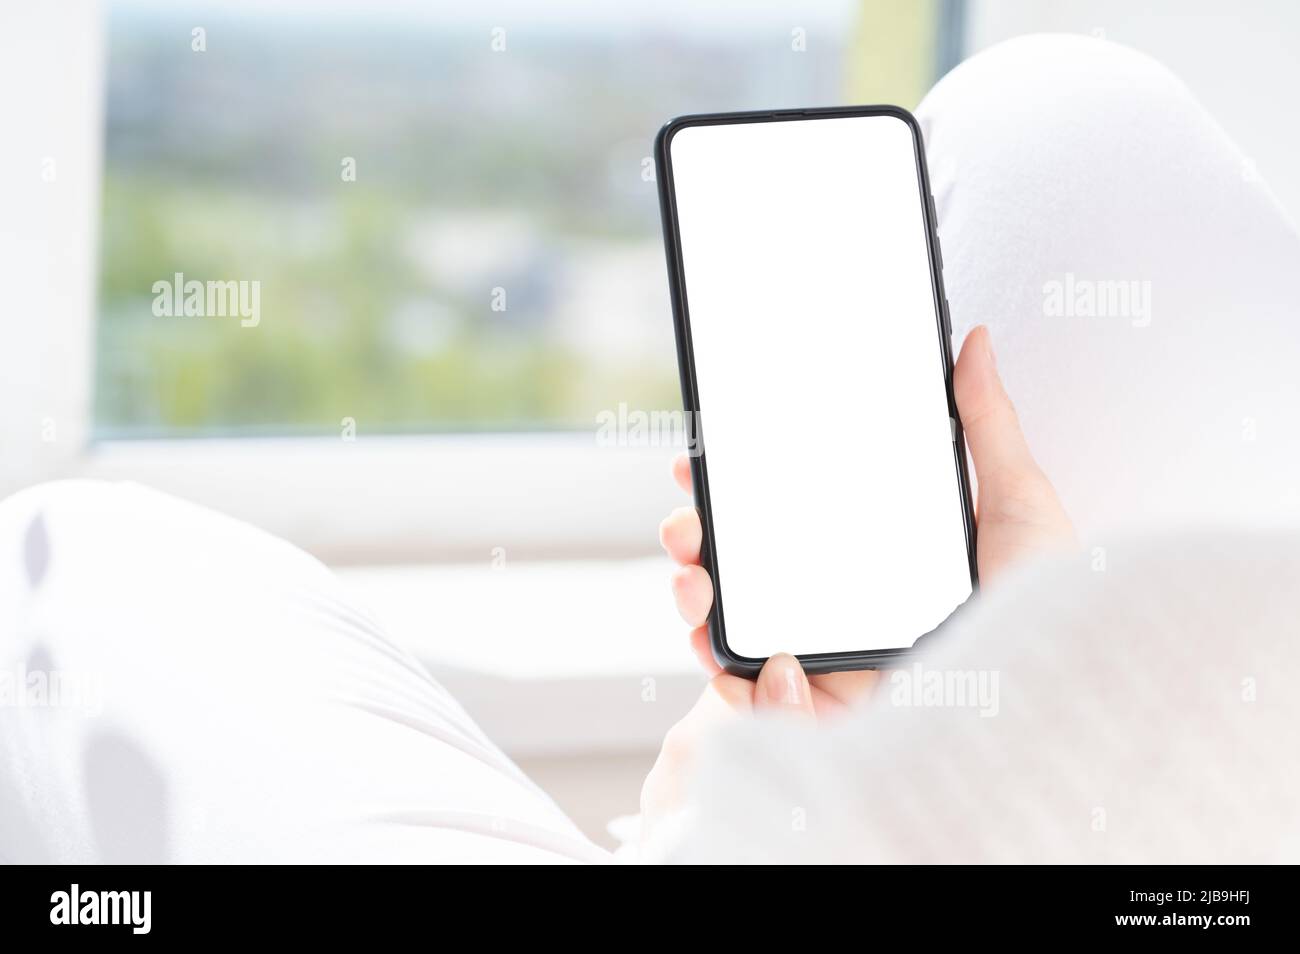 woman user customer hold cellphone mockup with white screen in hand. Use mobile shopping app, check social media news, texting mobile sms order food d Stock Photo